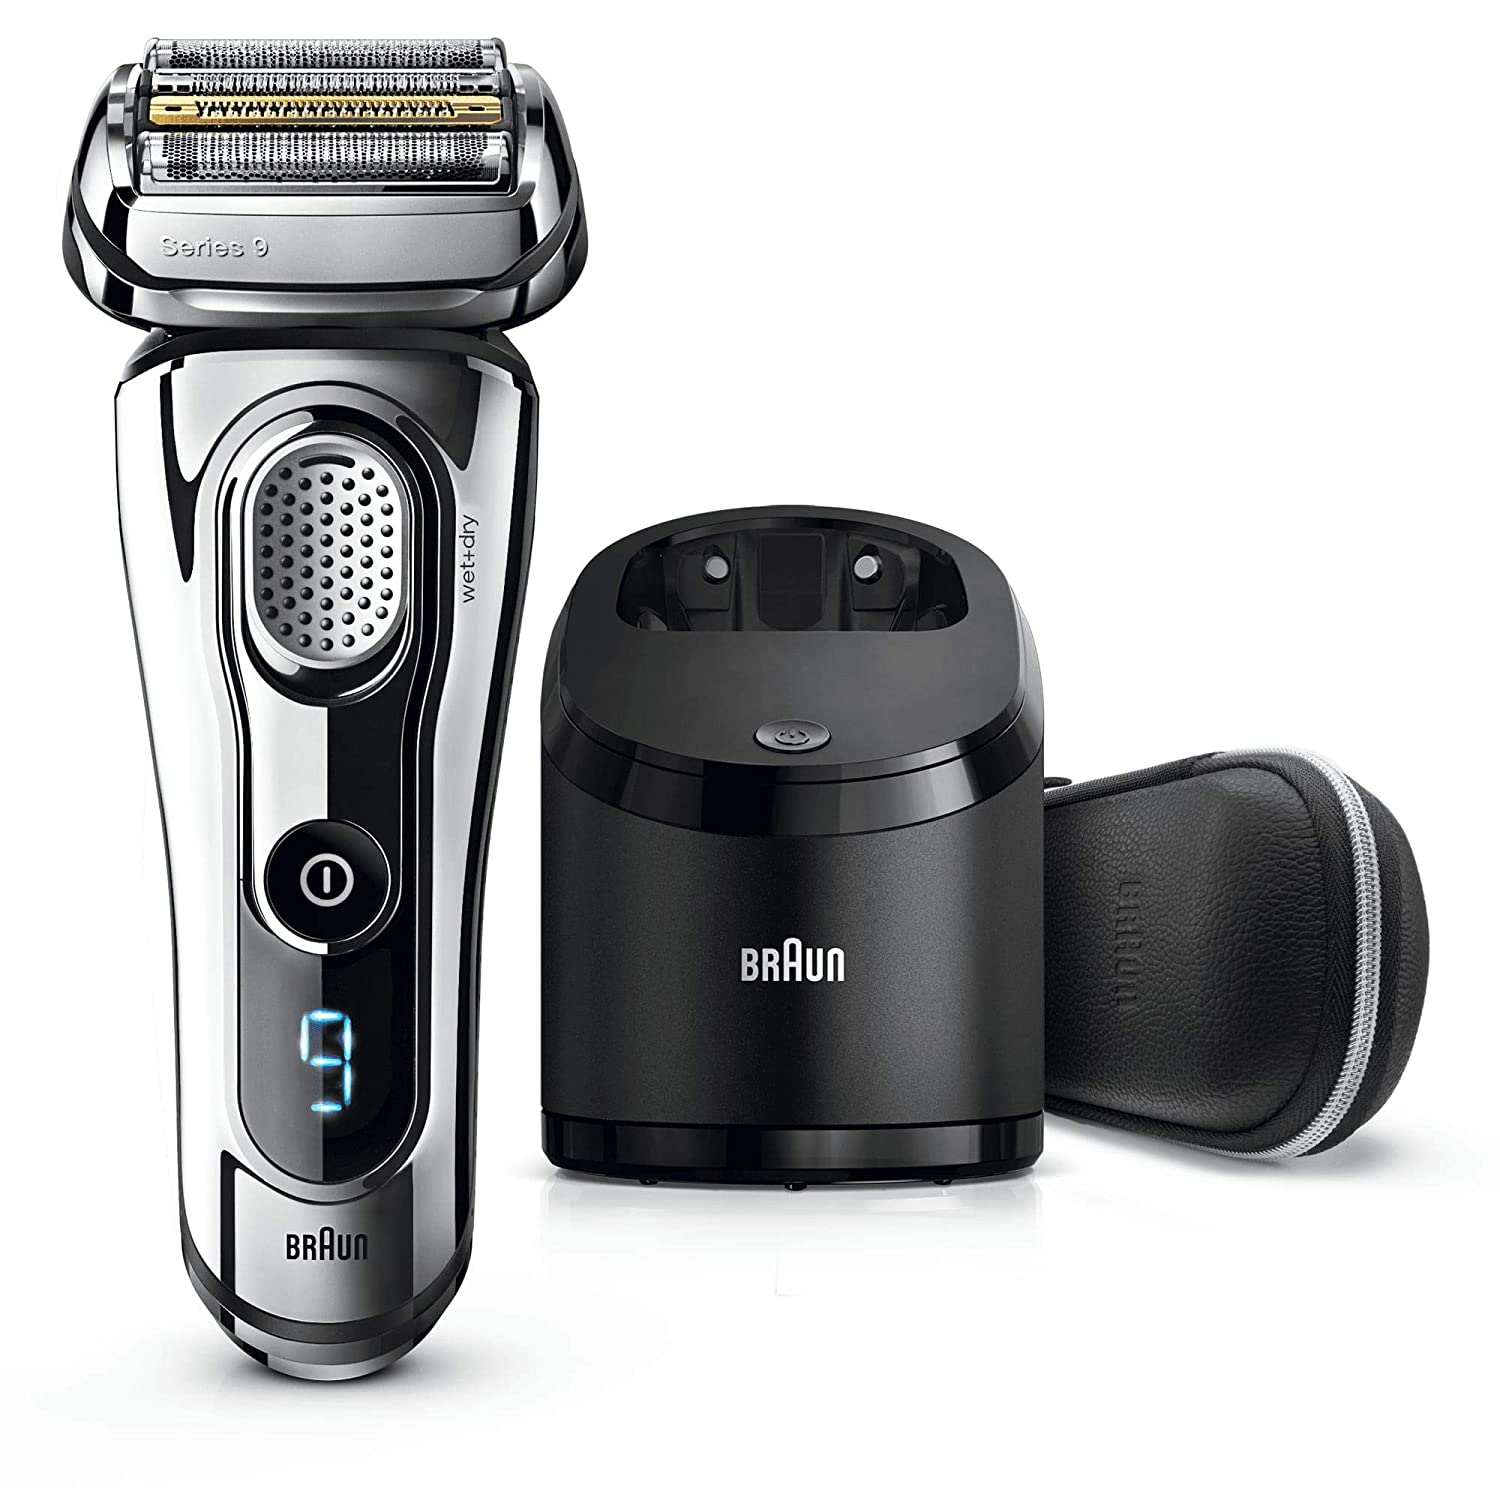 Braun Series 9 9297cc Razor with Cleaning and Charging Station